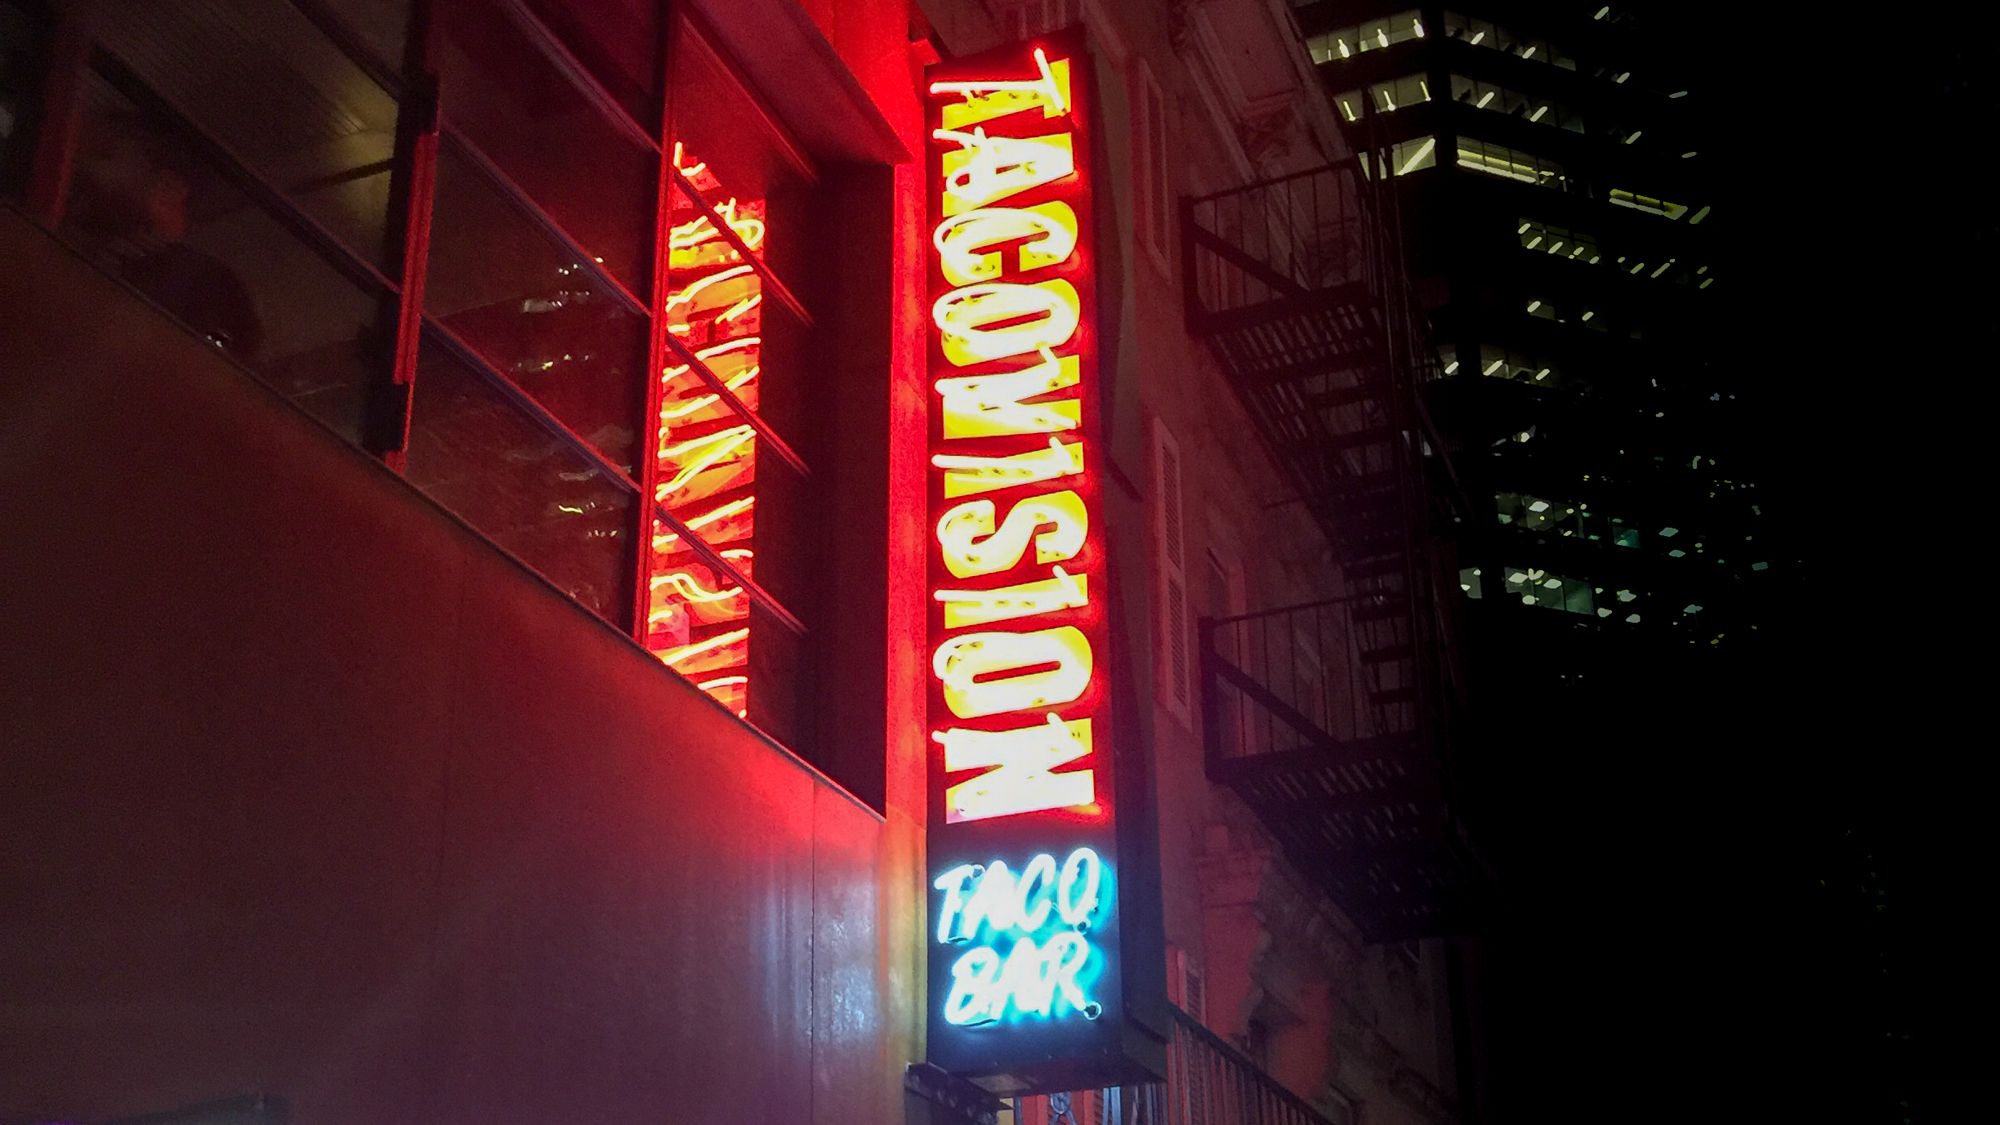 Midtown East: TacoVision